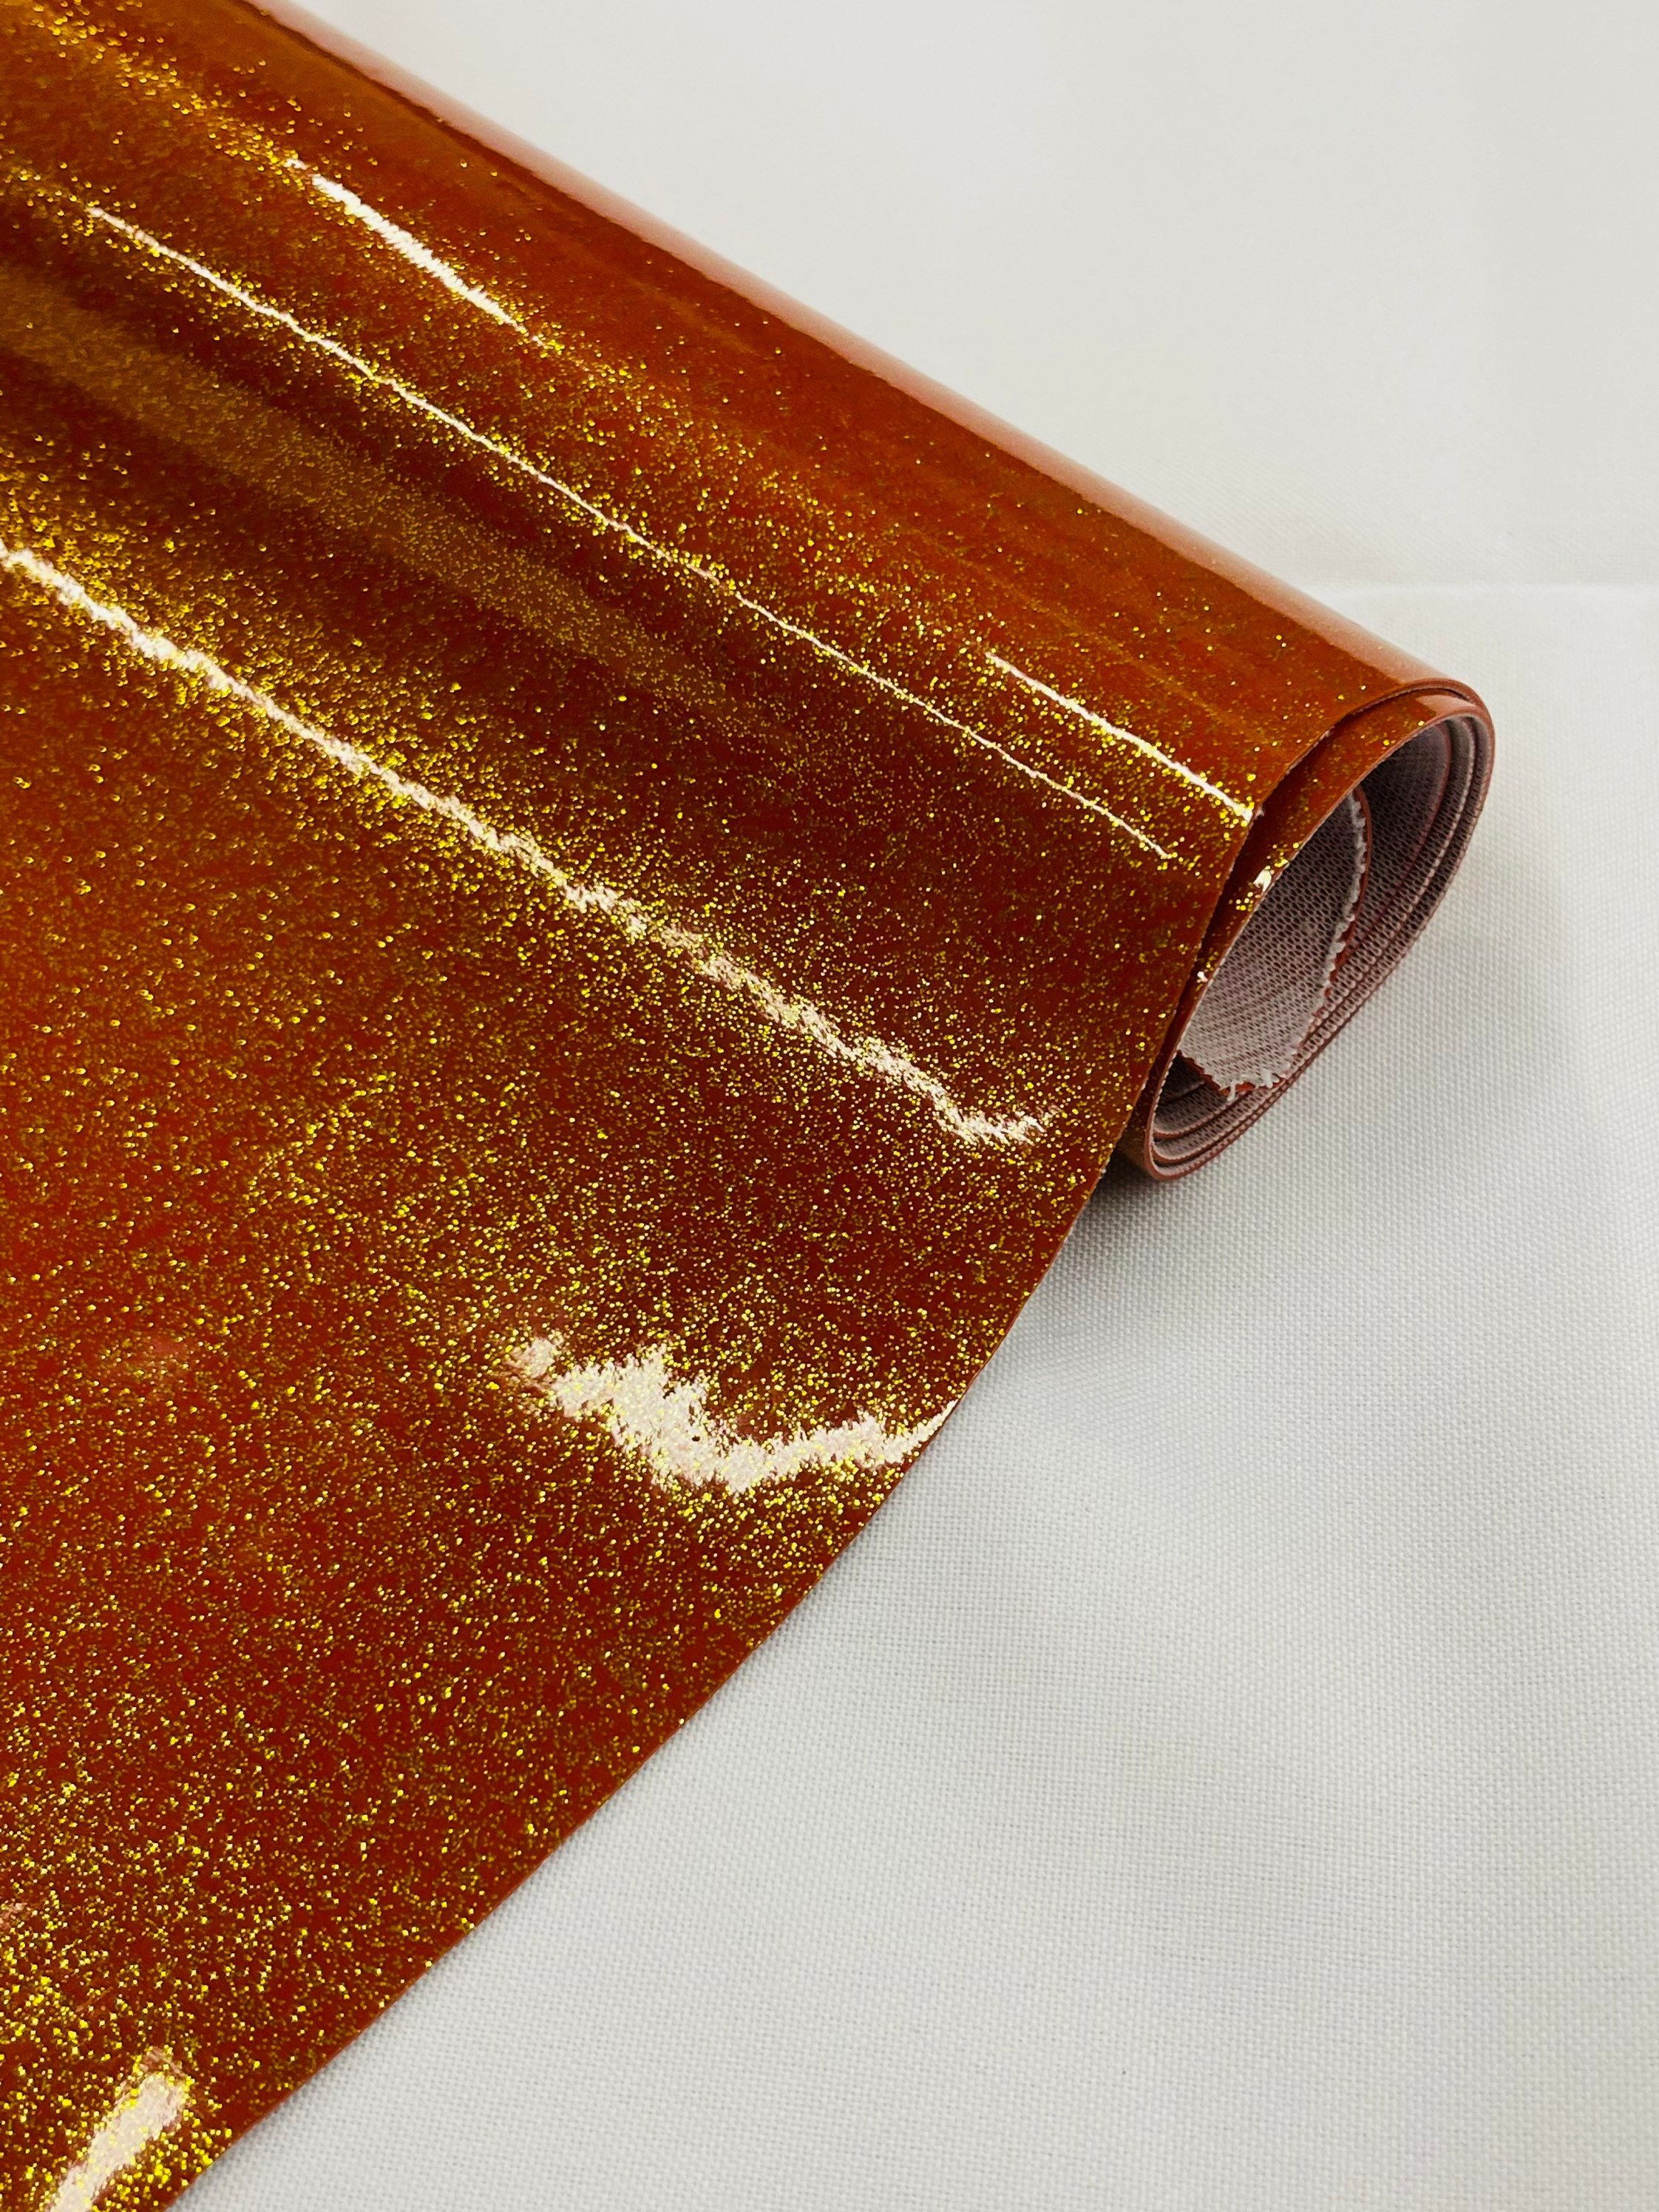 Burnt Orange 53/54 Wide Shiny Sparkle Glitter Vinyl, Faux Leather PVC- Upholstery Craft Fabric by The Yard.